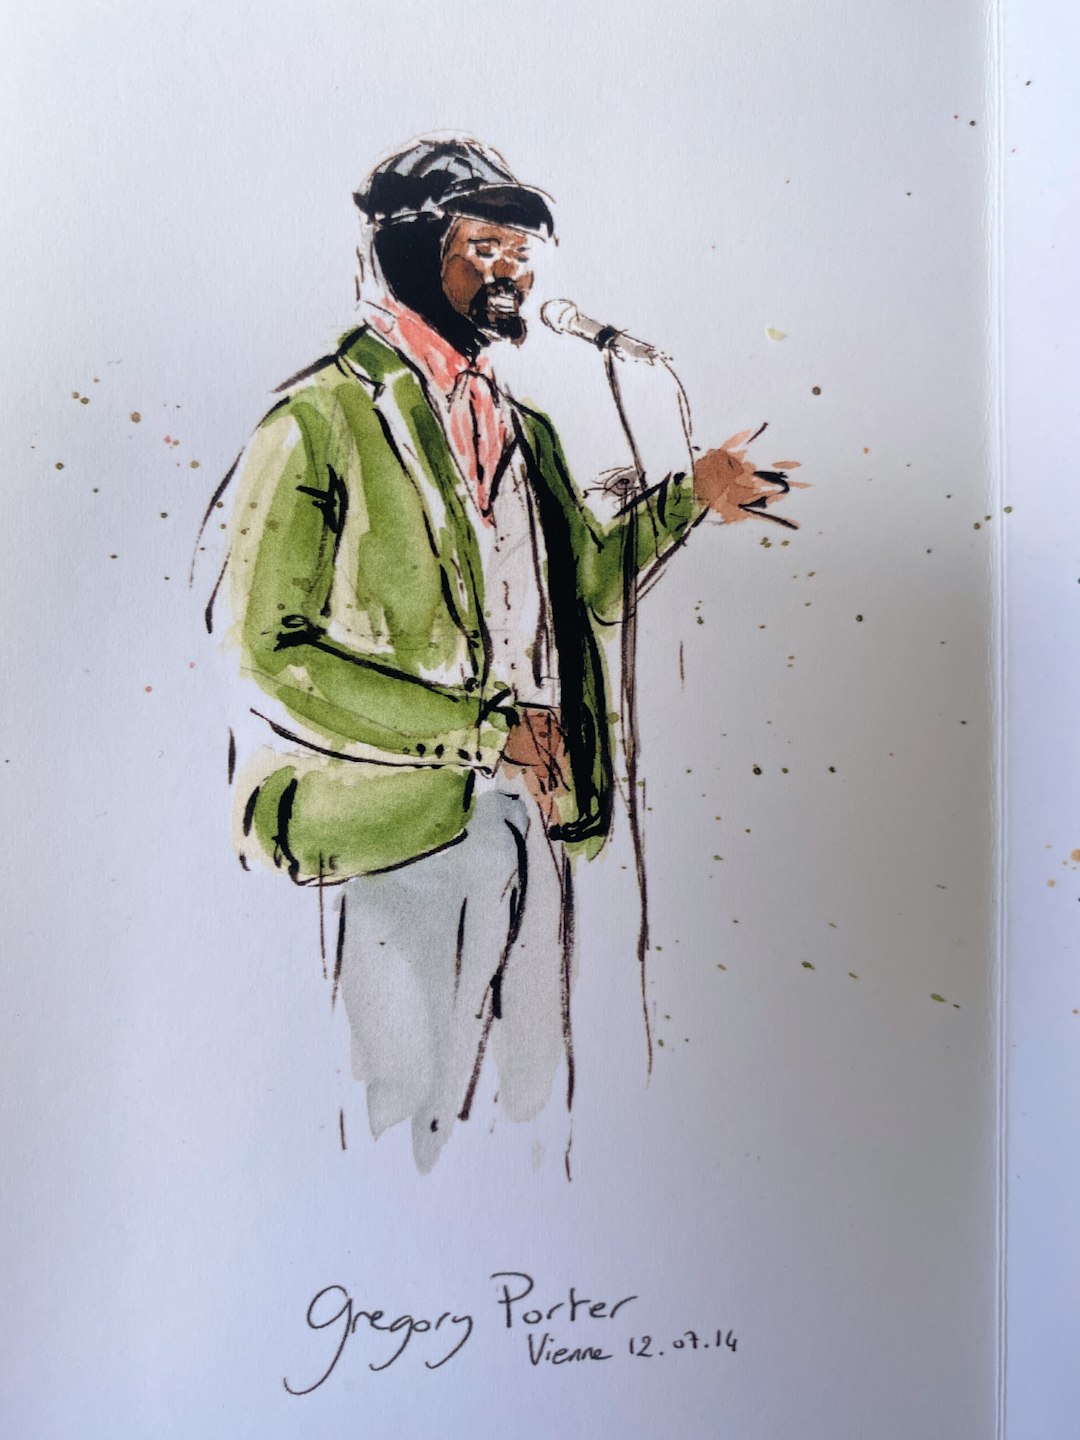 man in green suit holding a stick painting